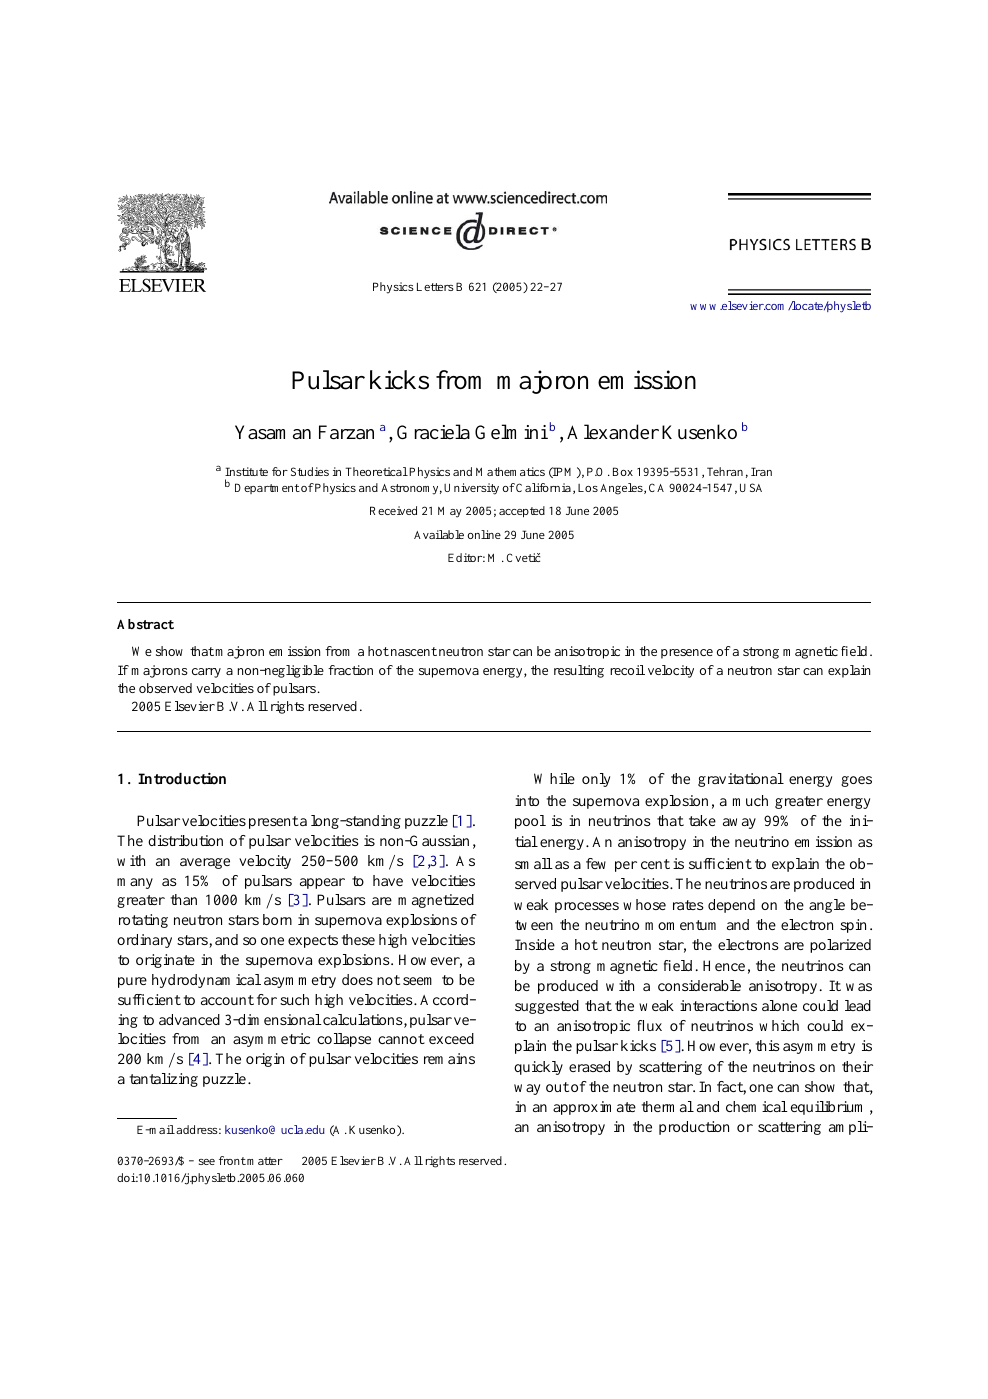 Pulsar Kicks From Majoron Emission Topic Of Research Paper In Physical Sciences Download Scholarly Article Pdf And Read For Free On Cyberleninka Open Science Hub